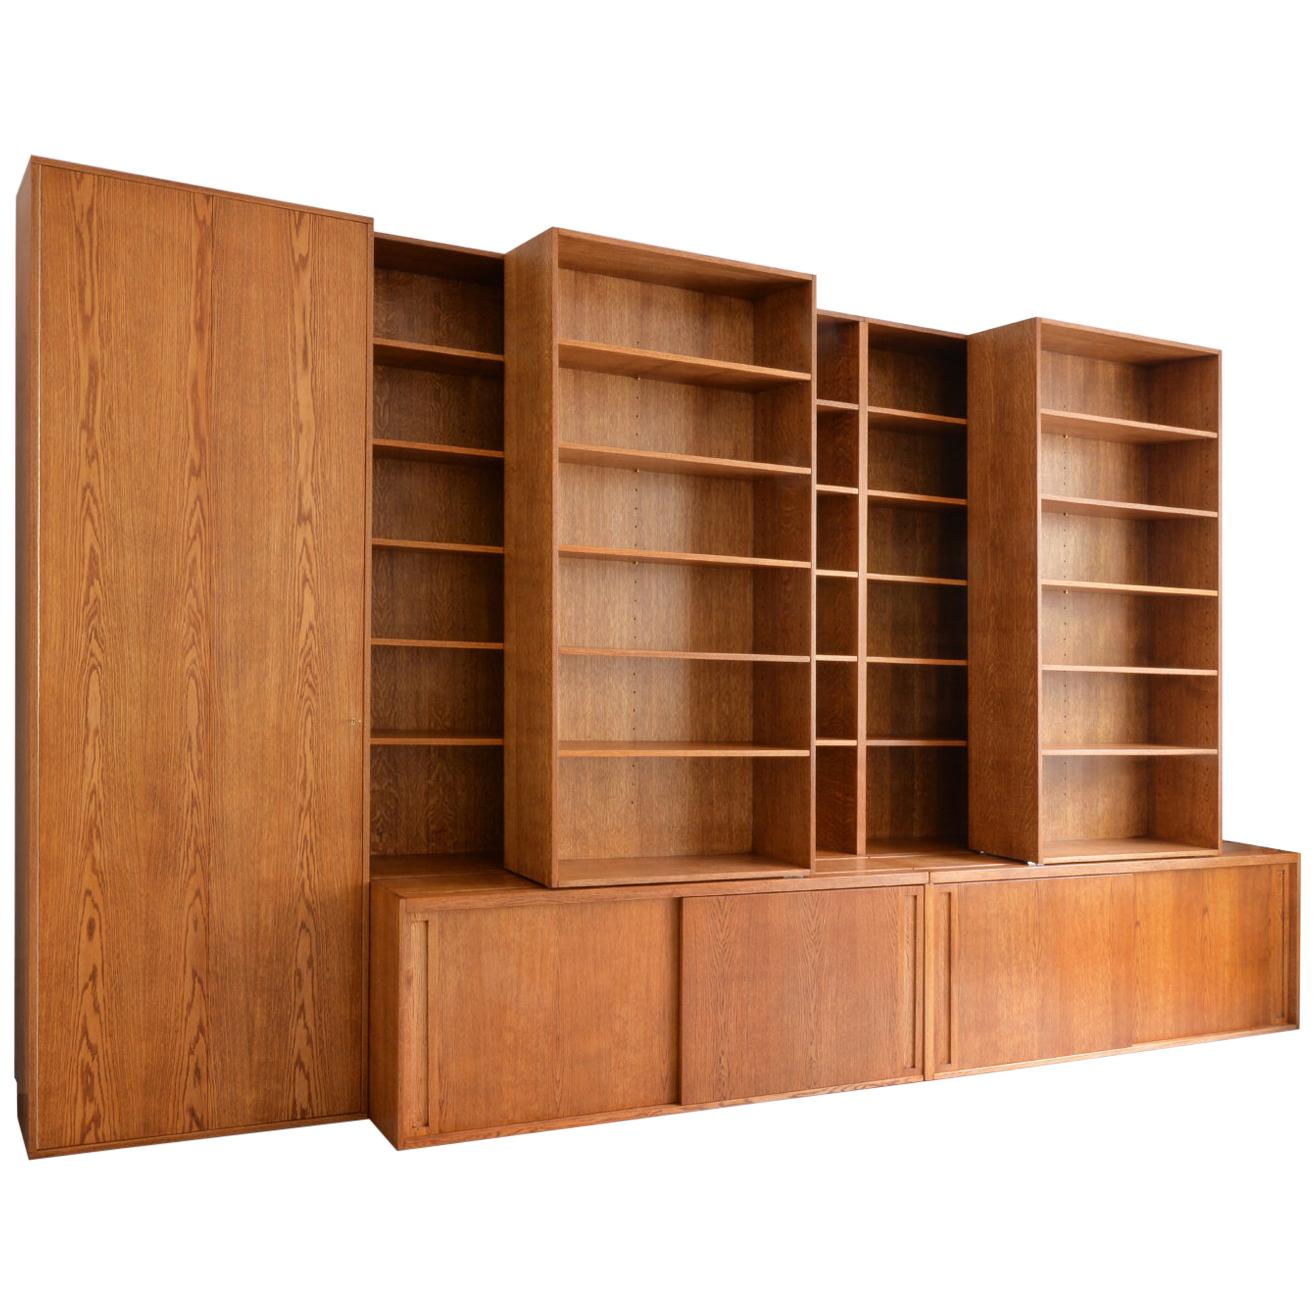 Customized Bookshelf in Handcrafted Wood with Sliding and Adjustable Shelves